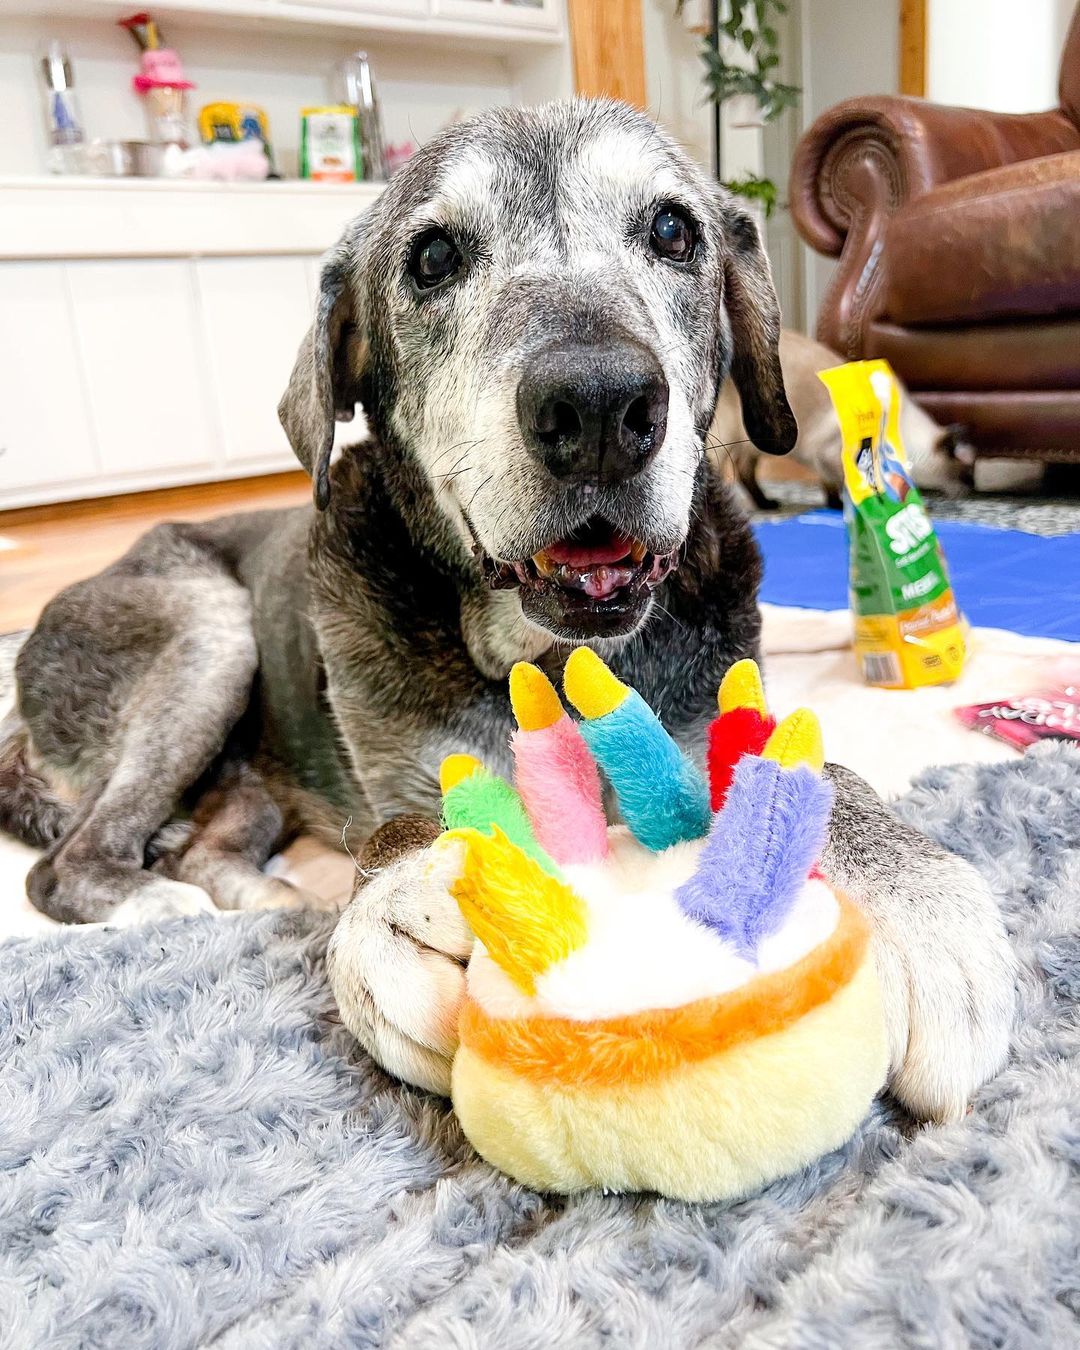 Annie having a birthday party with her toy birthday cake